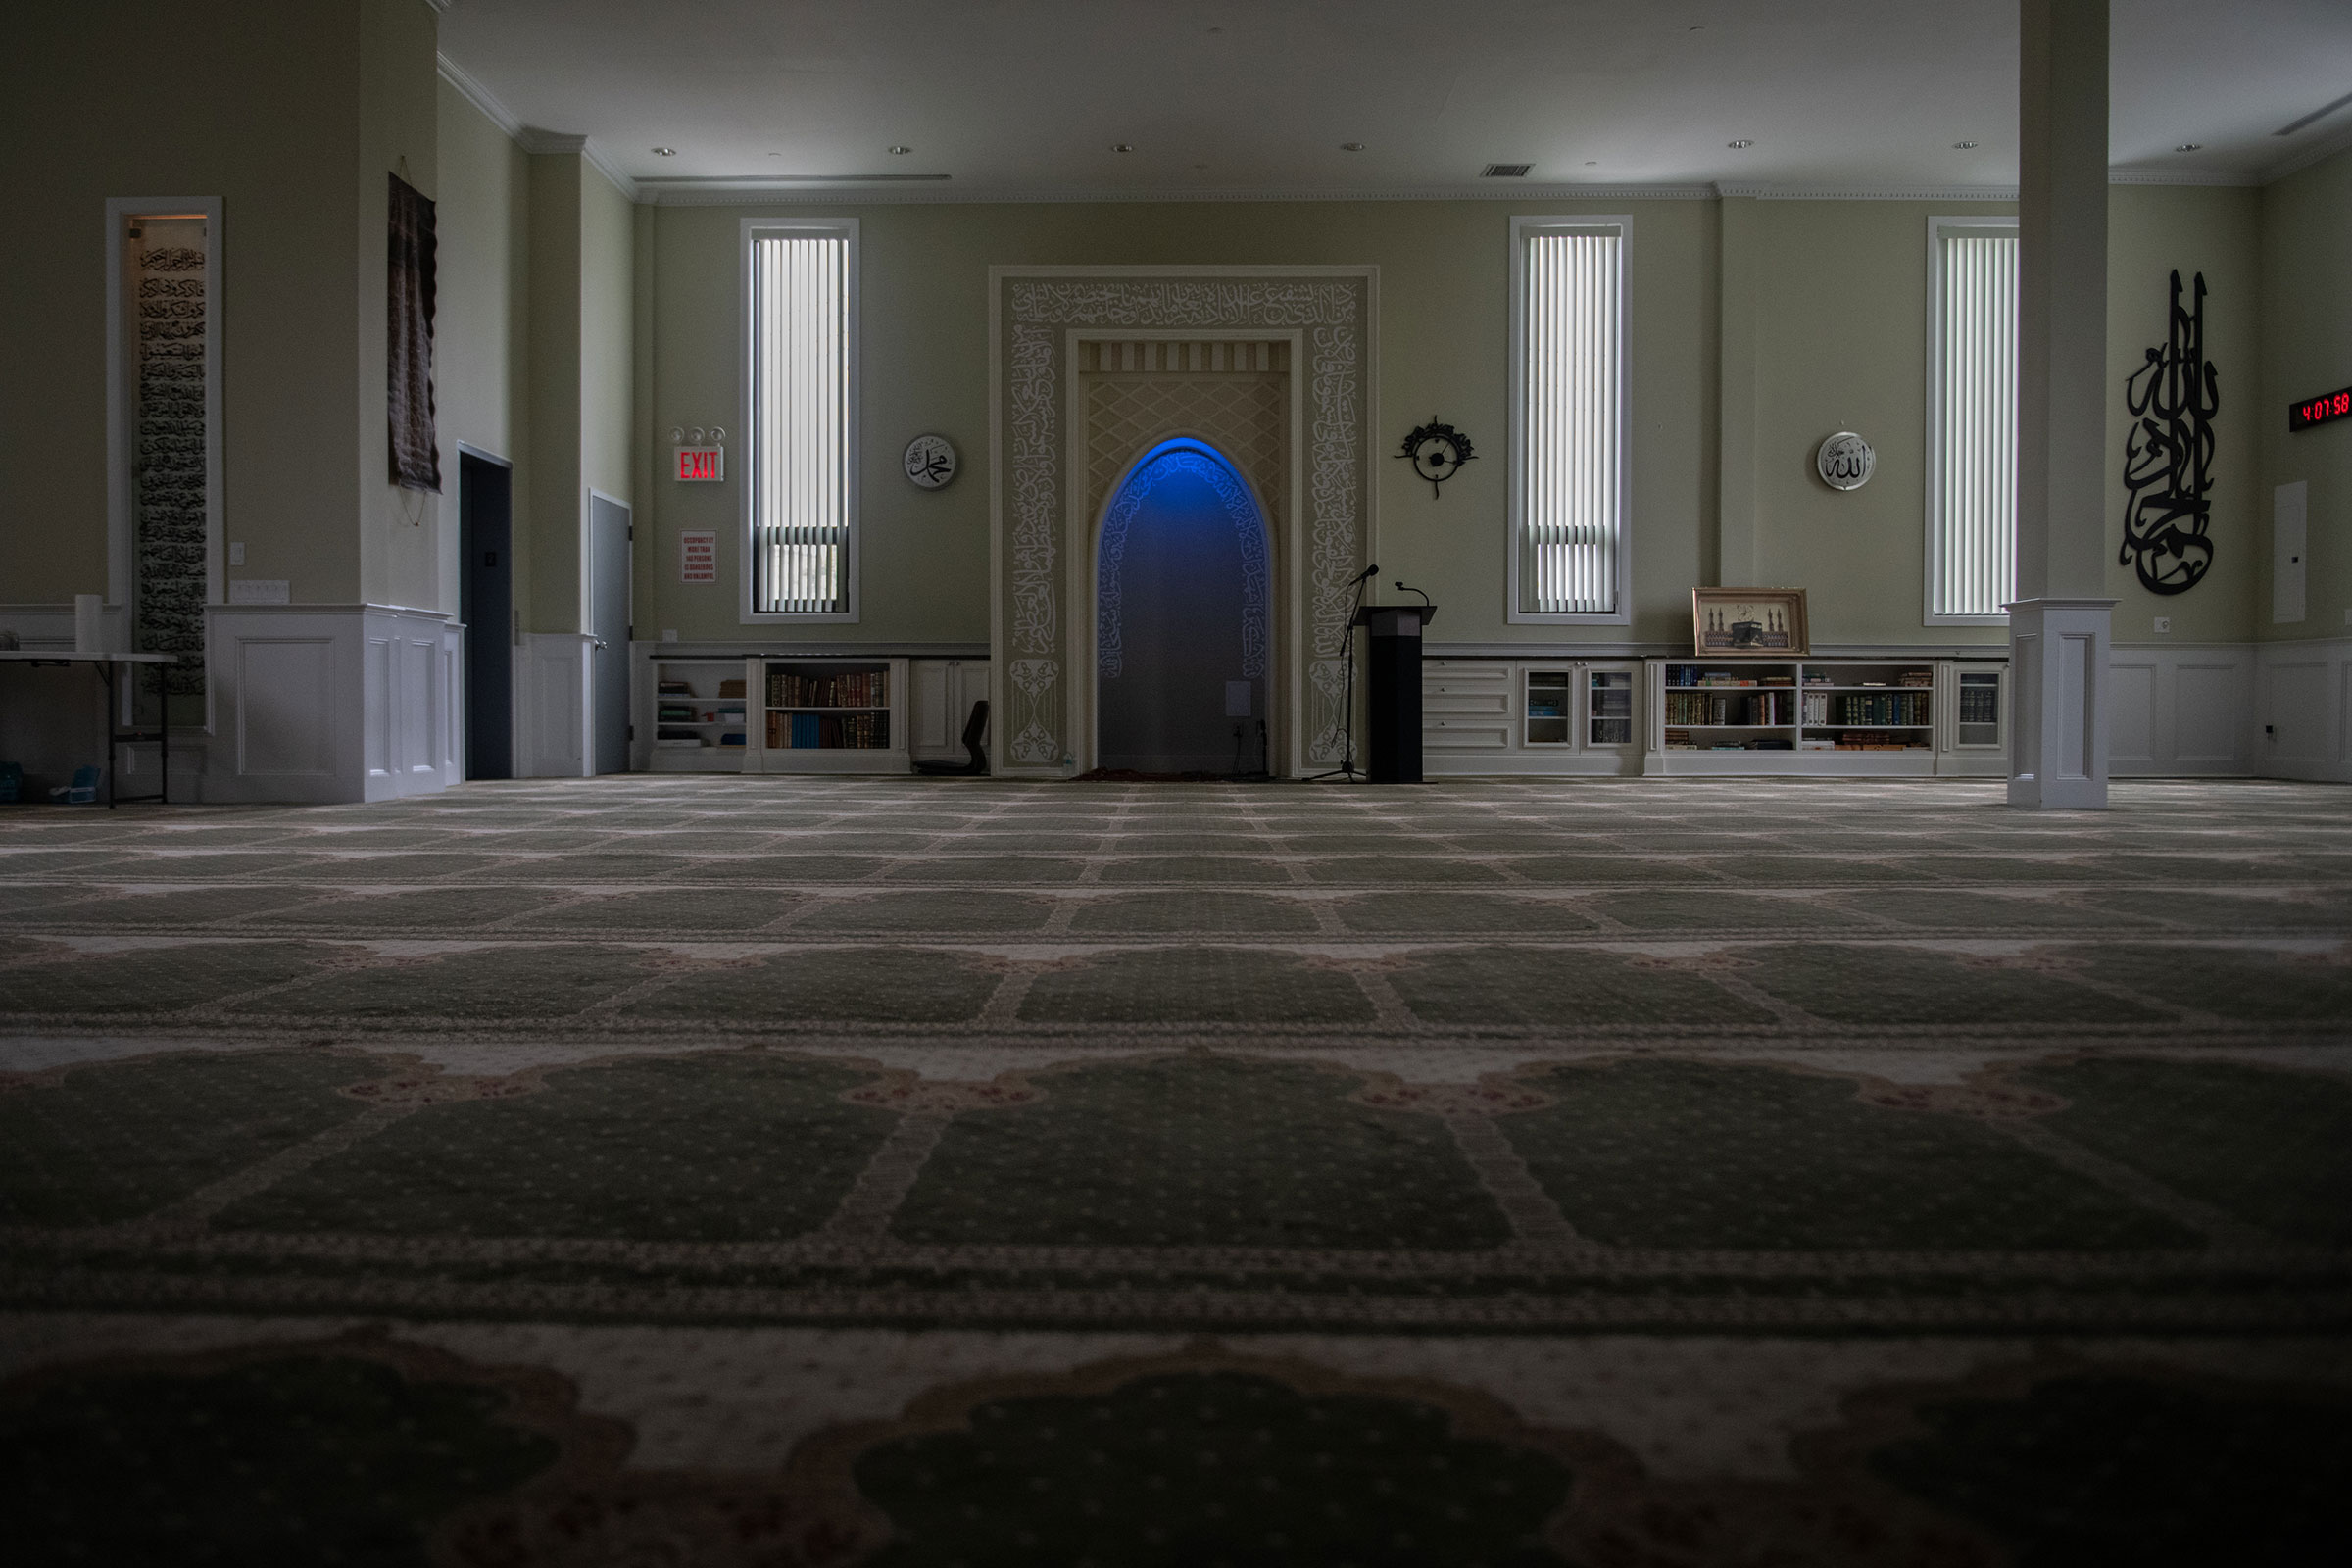 Dar-al Taqwa Islamic Center in Queens, NY May 8, 2022. Kholood Eid for Time